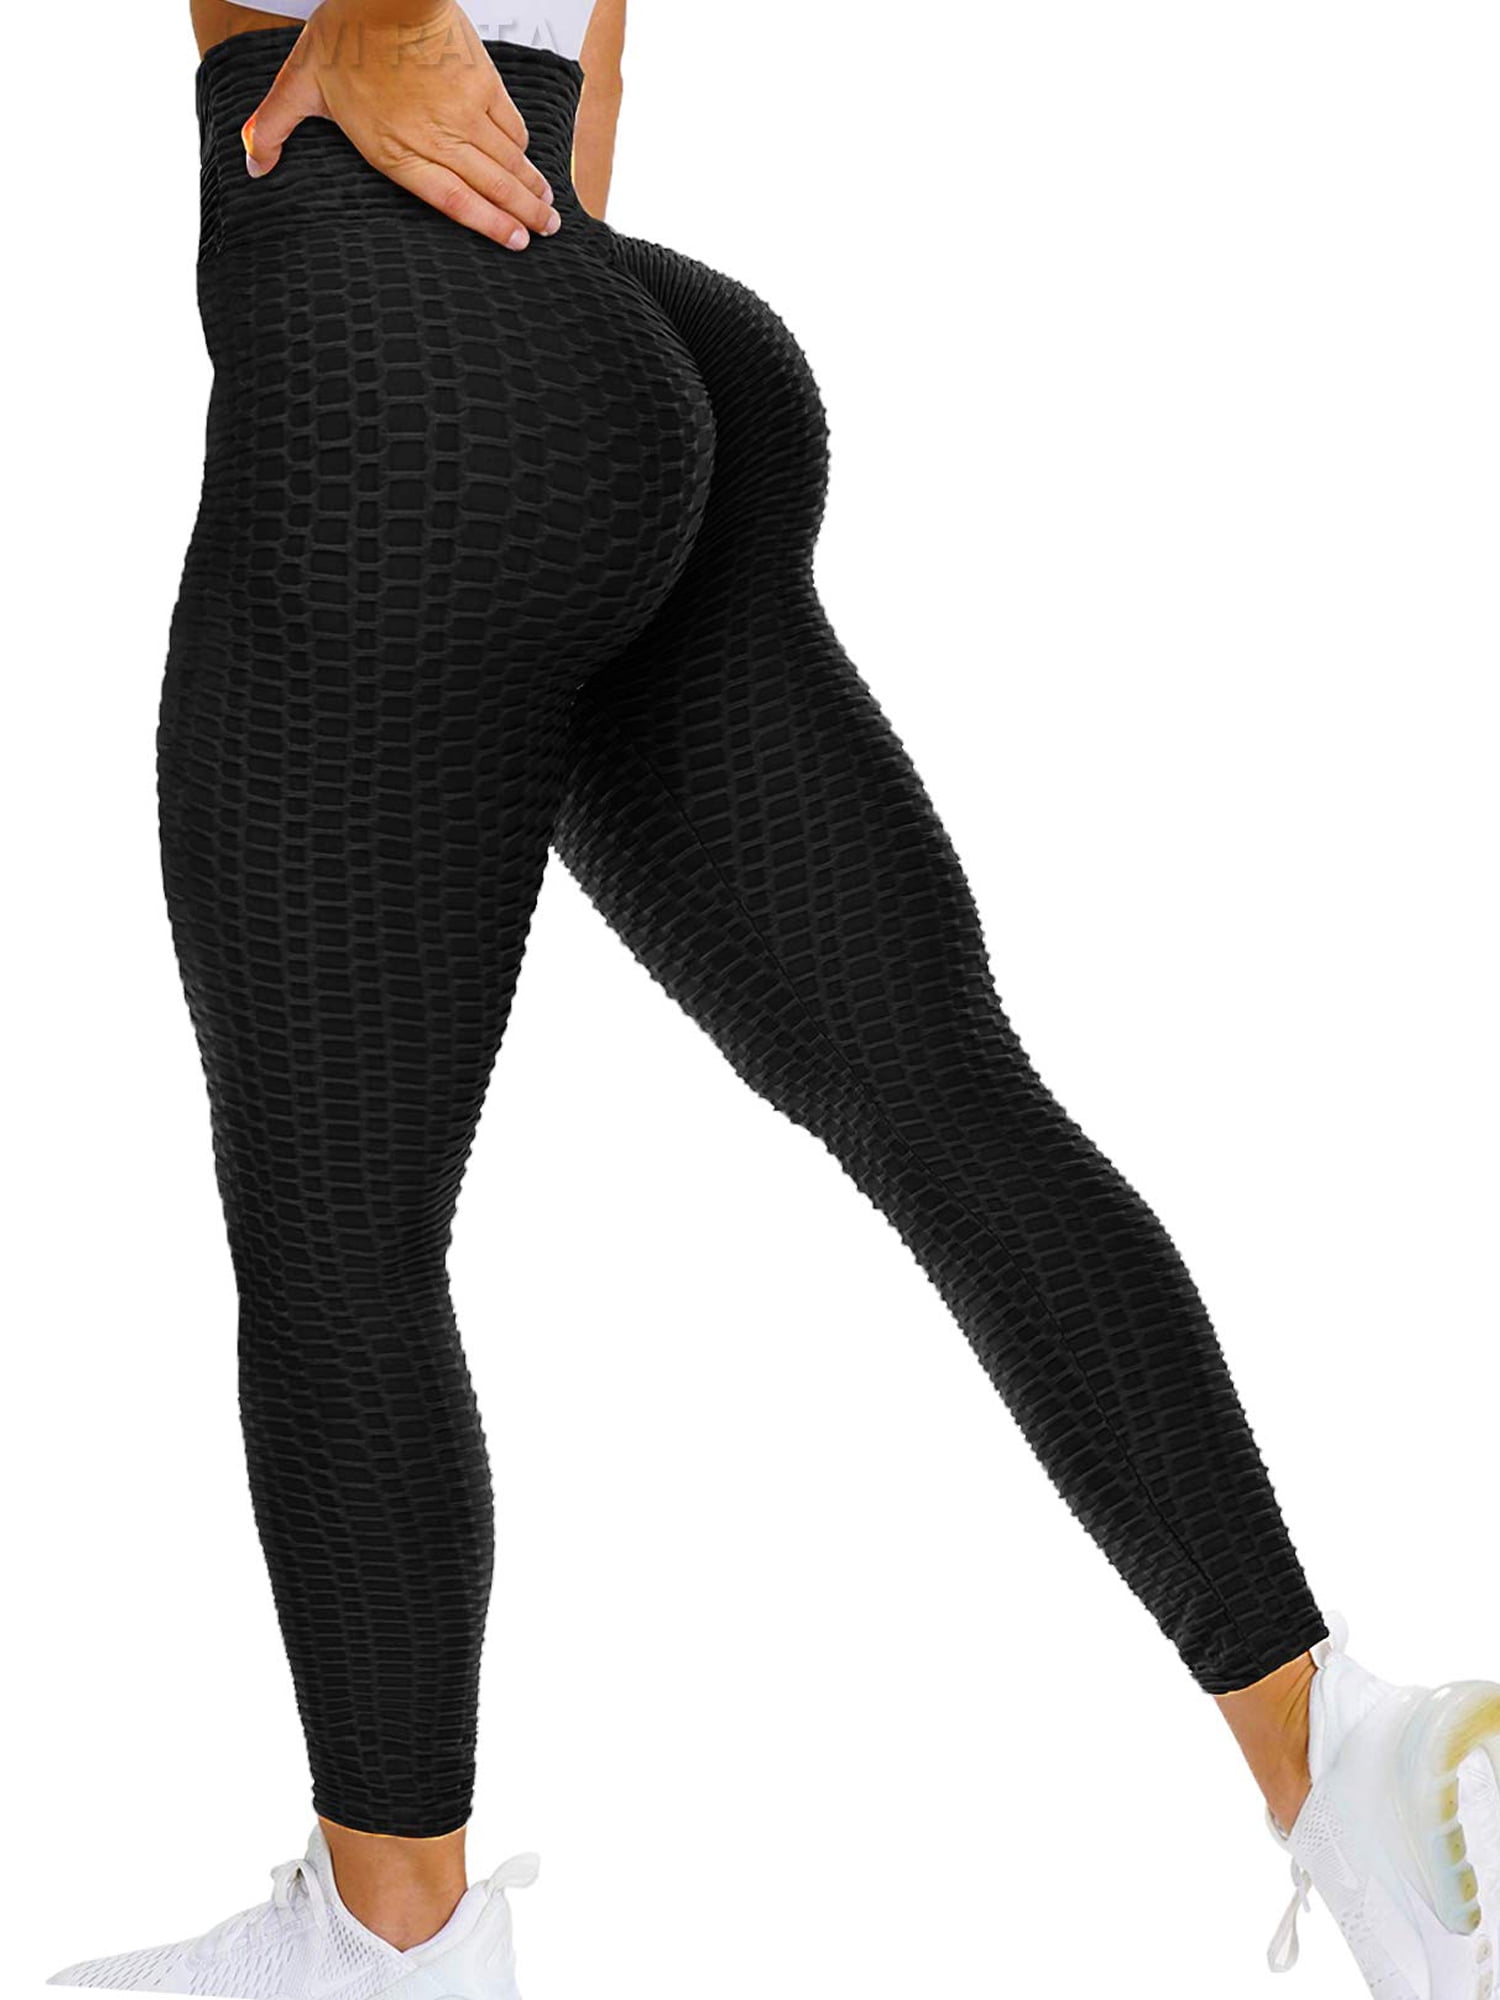 KIWI RATA High Waist Scrunched Butt Leggings for Women Compression Fitness  Yoga Pants Butt Lift Activewear Tights